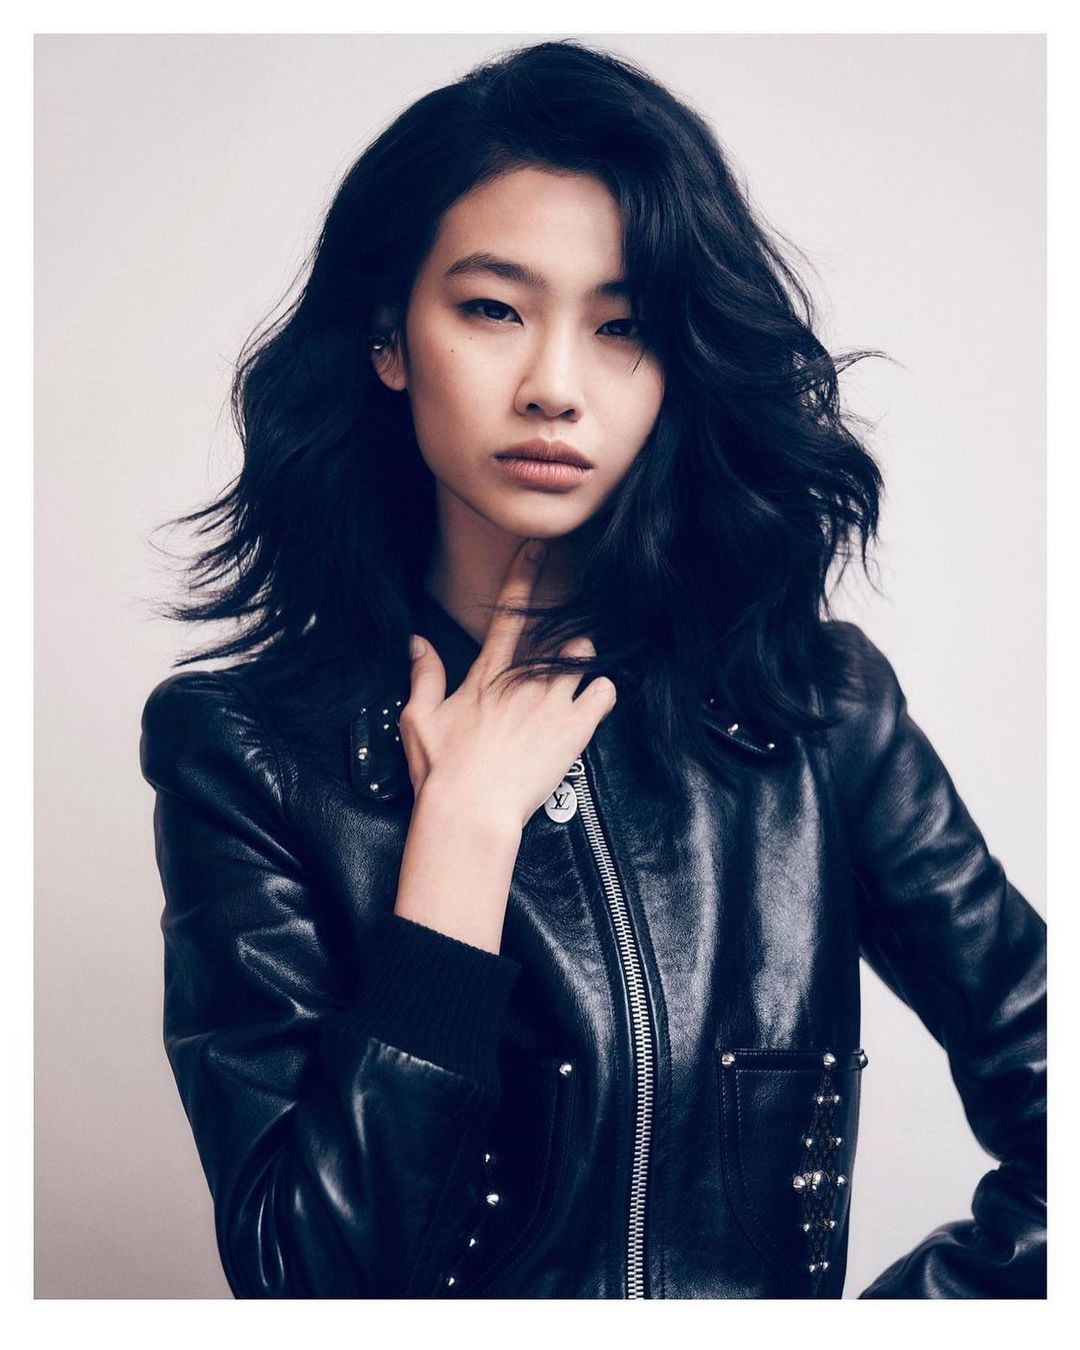 Squid Game' actress Jung Ho-yeon is photographed for Los Angeles